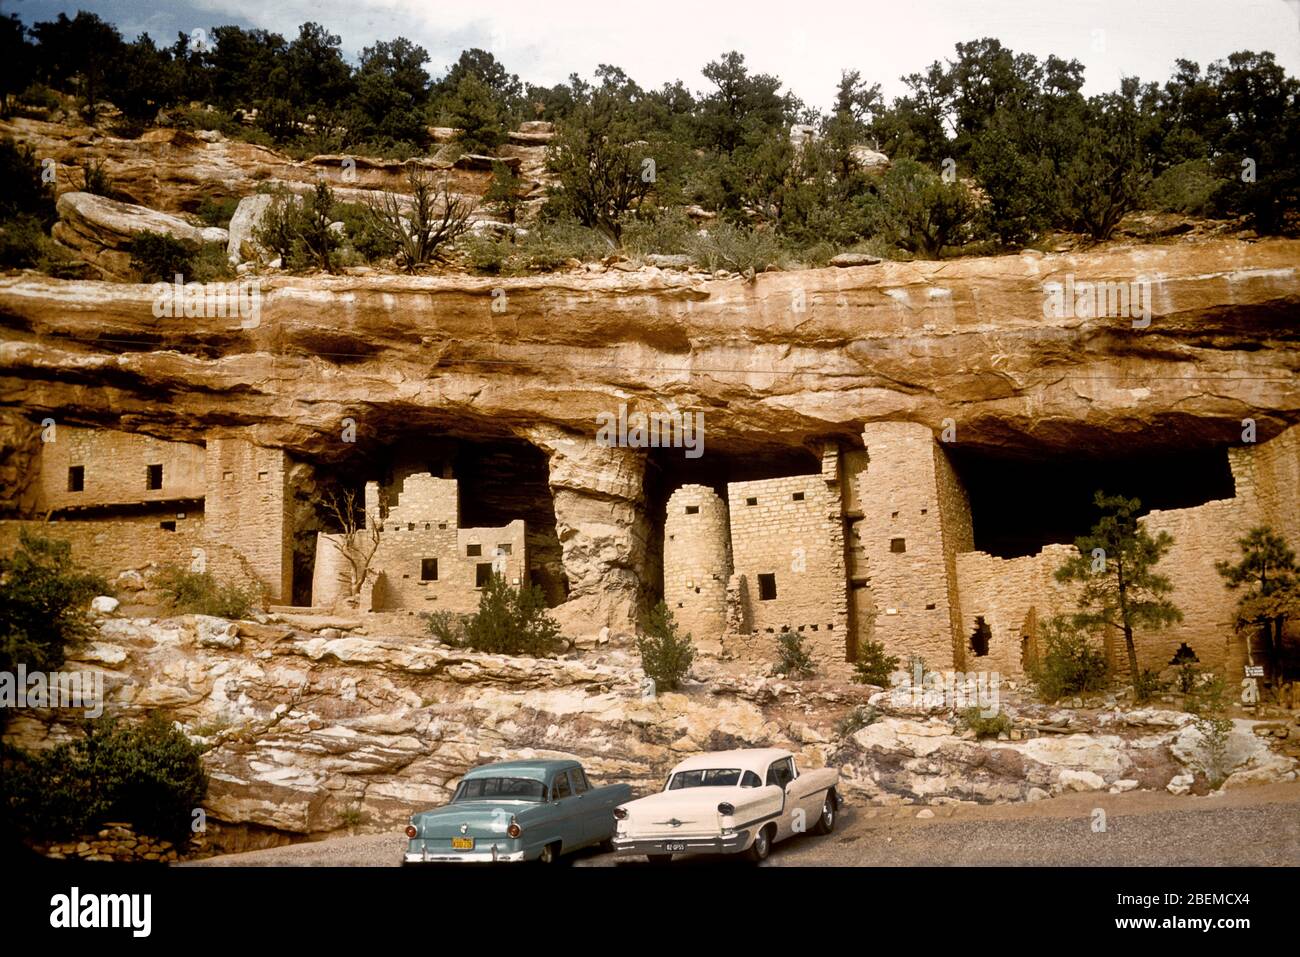 The Manitou Cliff Dwellings  Ancestral Puebloan cliff dwellings in Colorado, USA 1958 Stock Photo